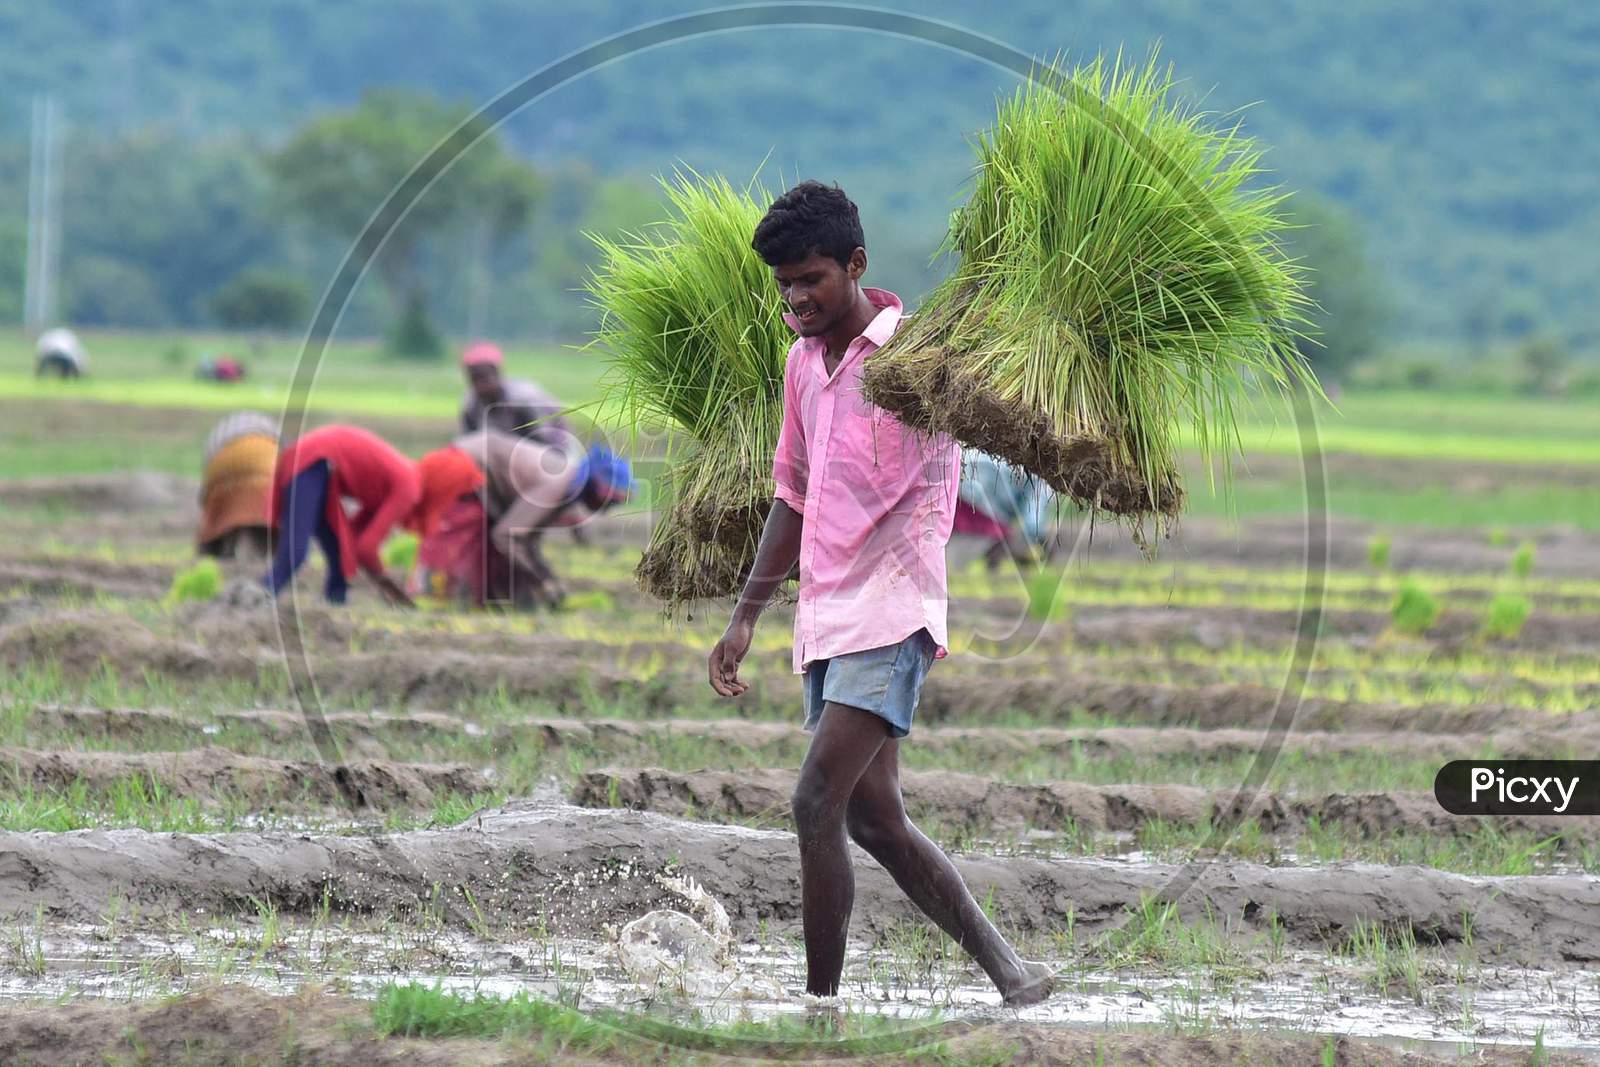 A farmer carries a bunch of paddy saplings in a field at a village in Nagaon, Assam on July 11, 2020